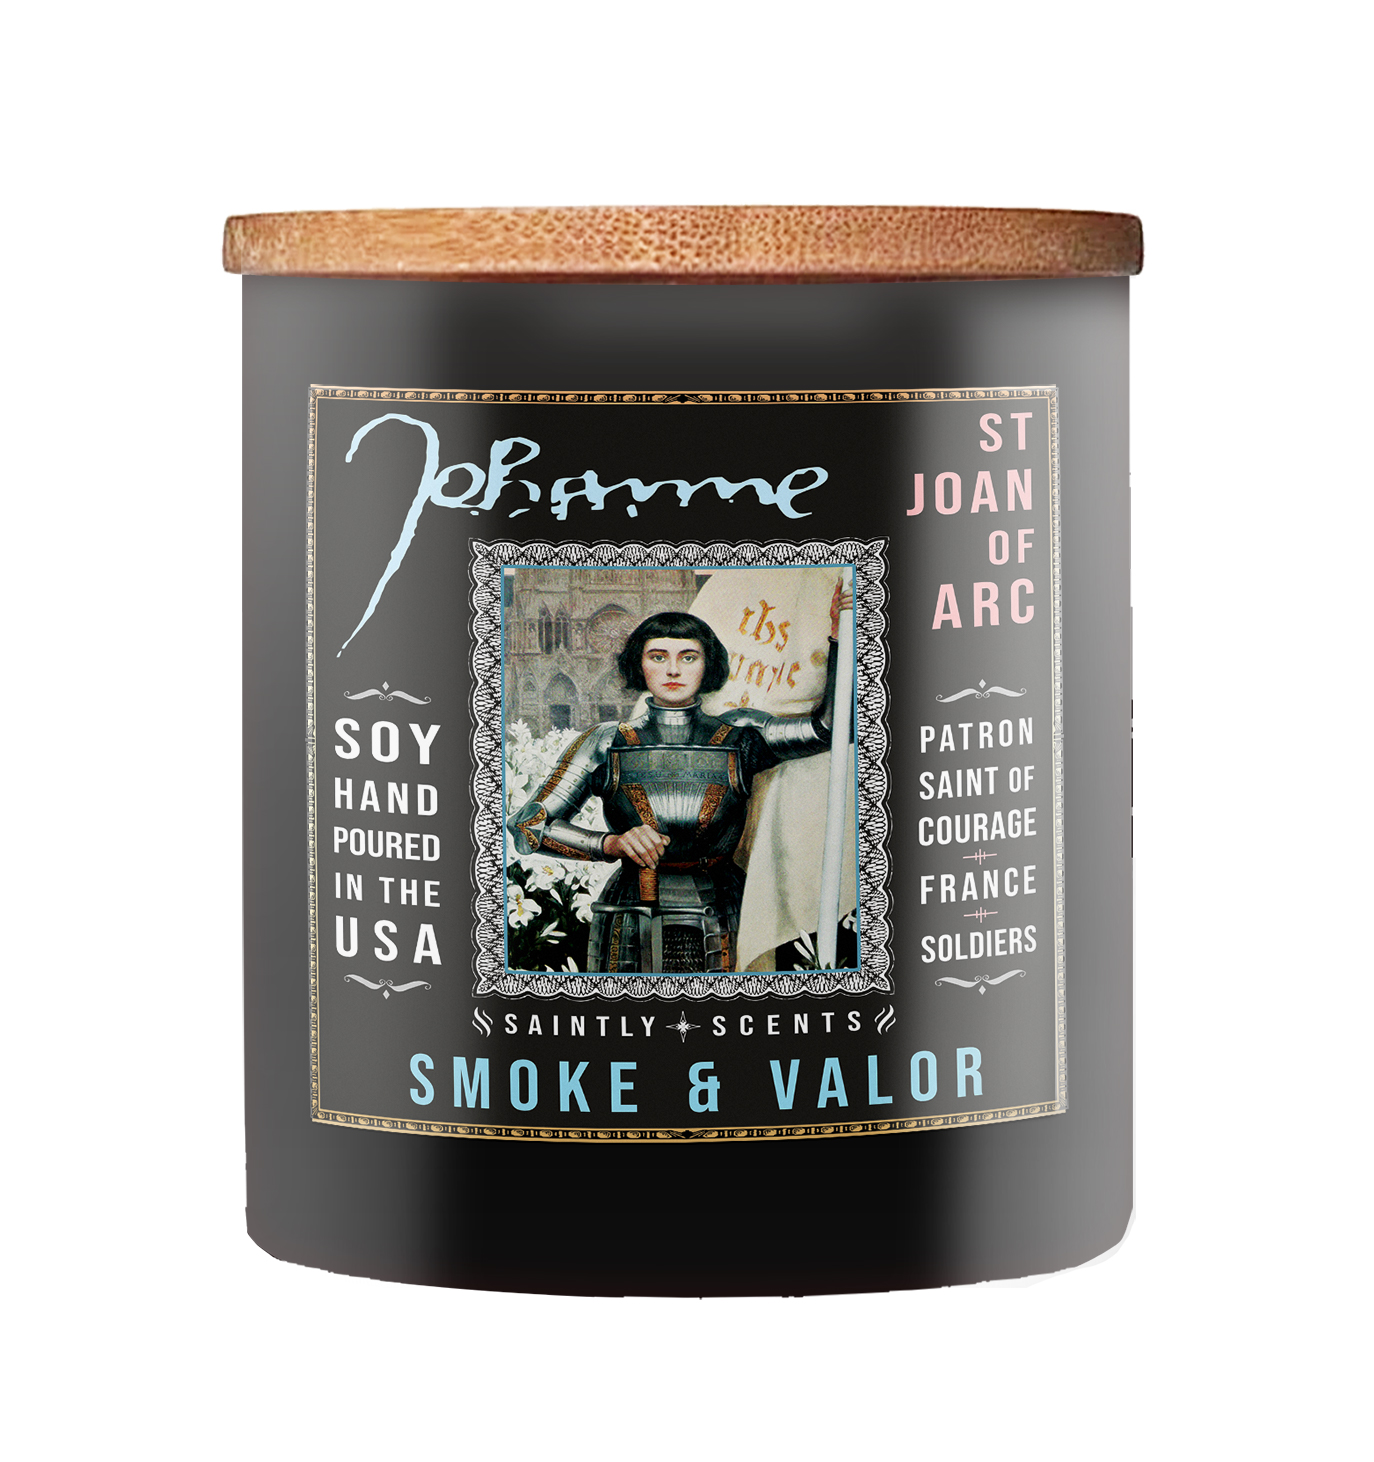 St. Joan of Arc Smoke and Valor Scented Candle